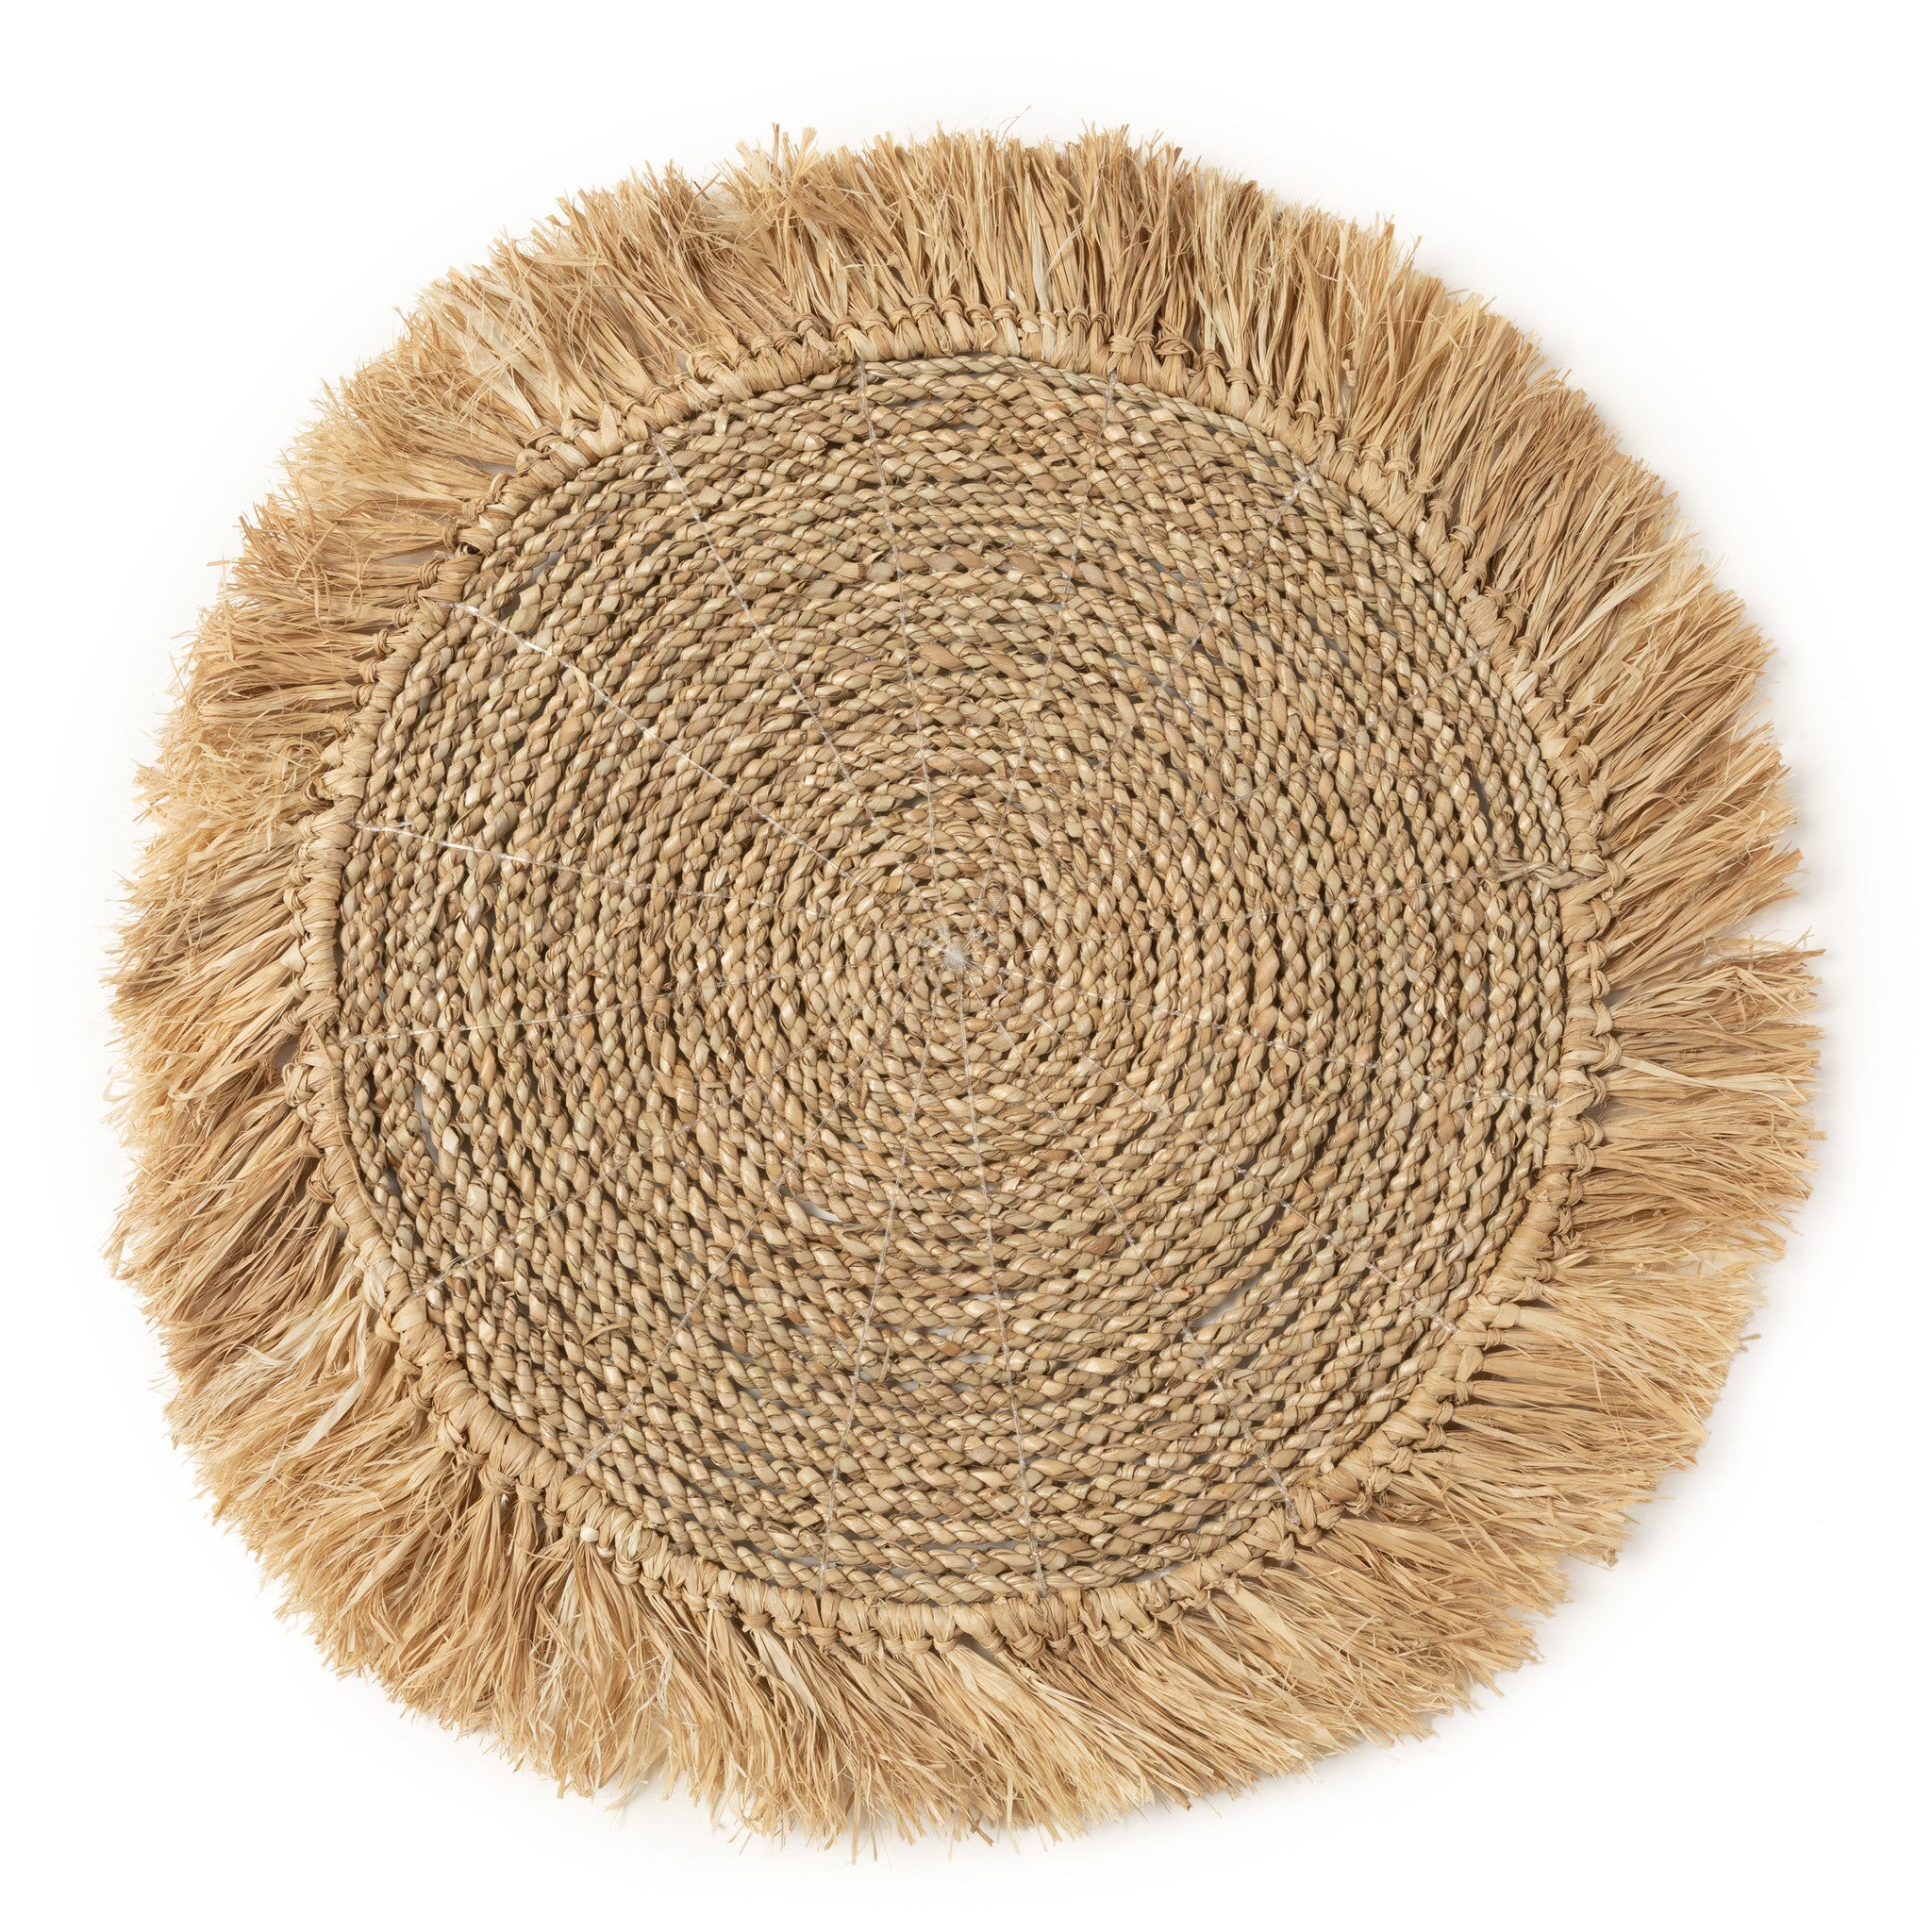 THE SEAGRASS RAFFIA Placemat Natural front view